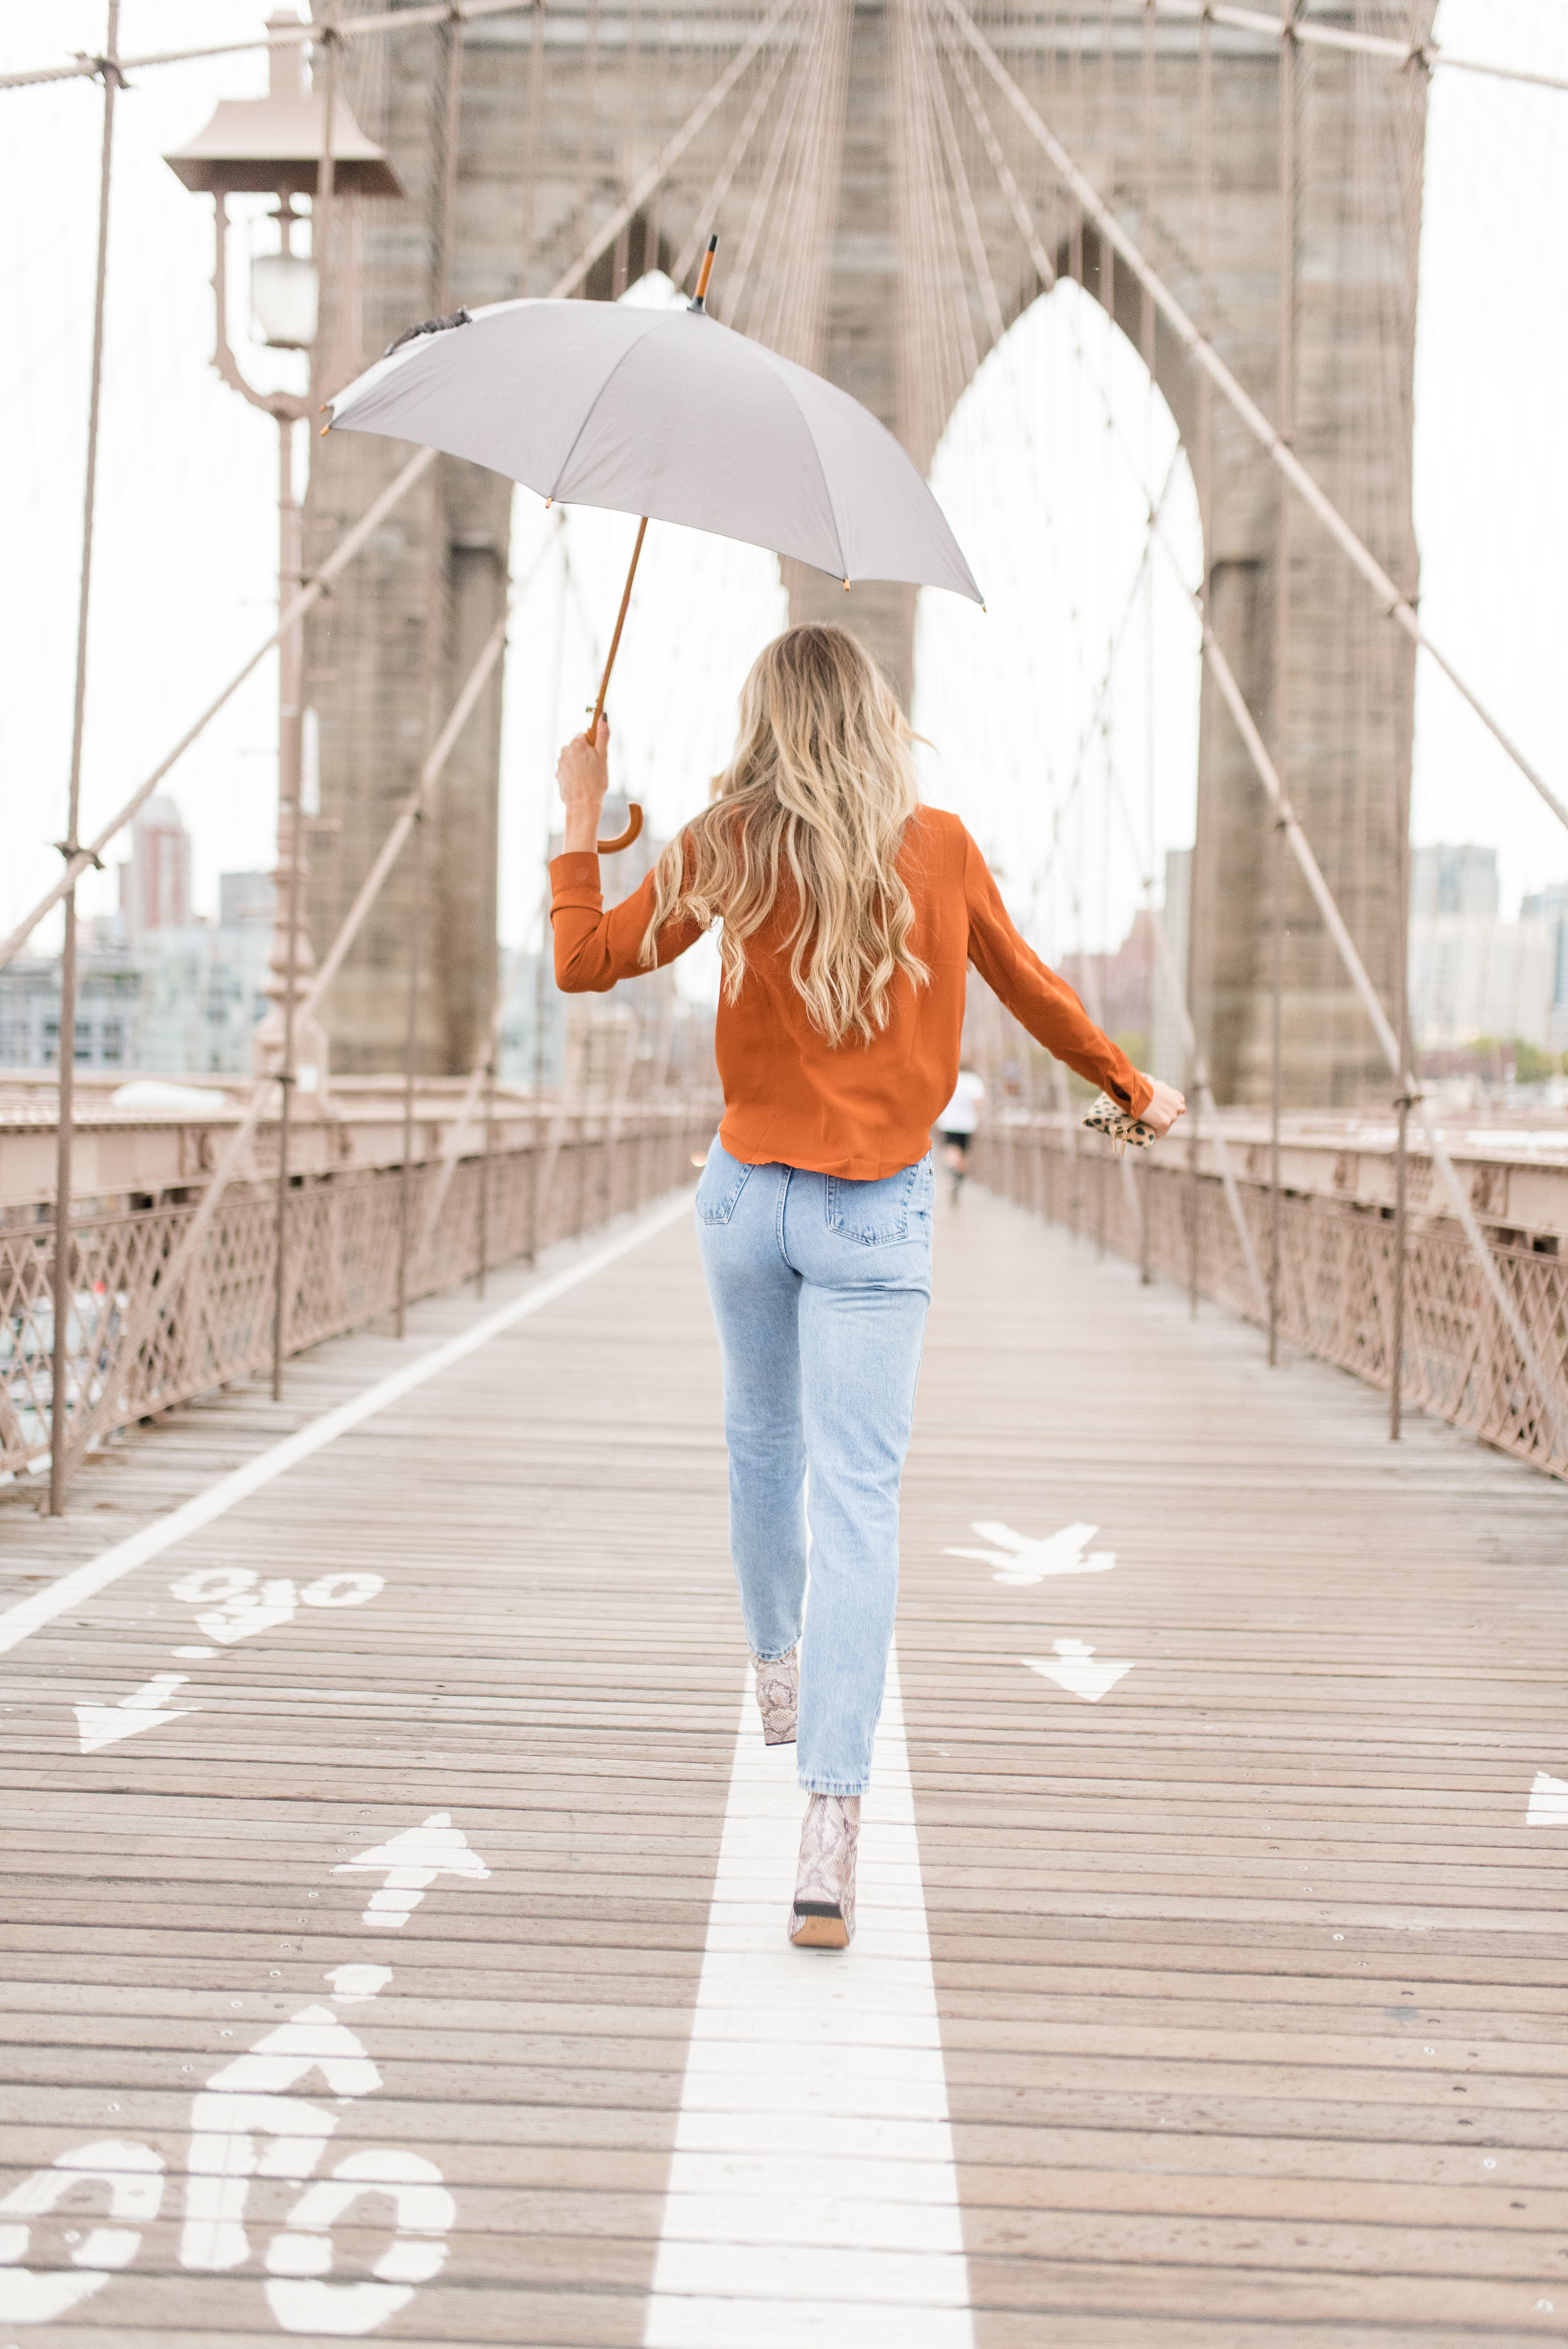 My First NYFW as a lifestyle and fashion blogger Ashley Bell Tallblondebell : Brooklyn Bridge